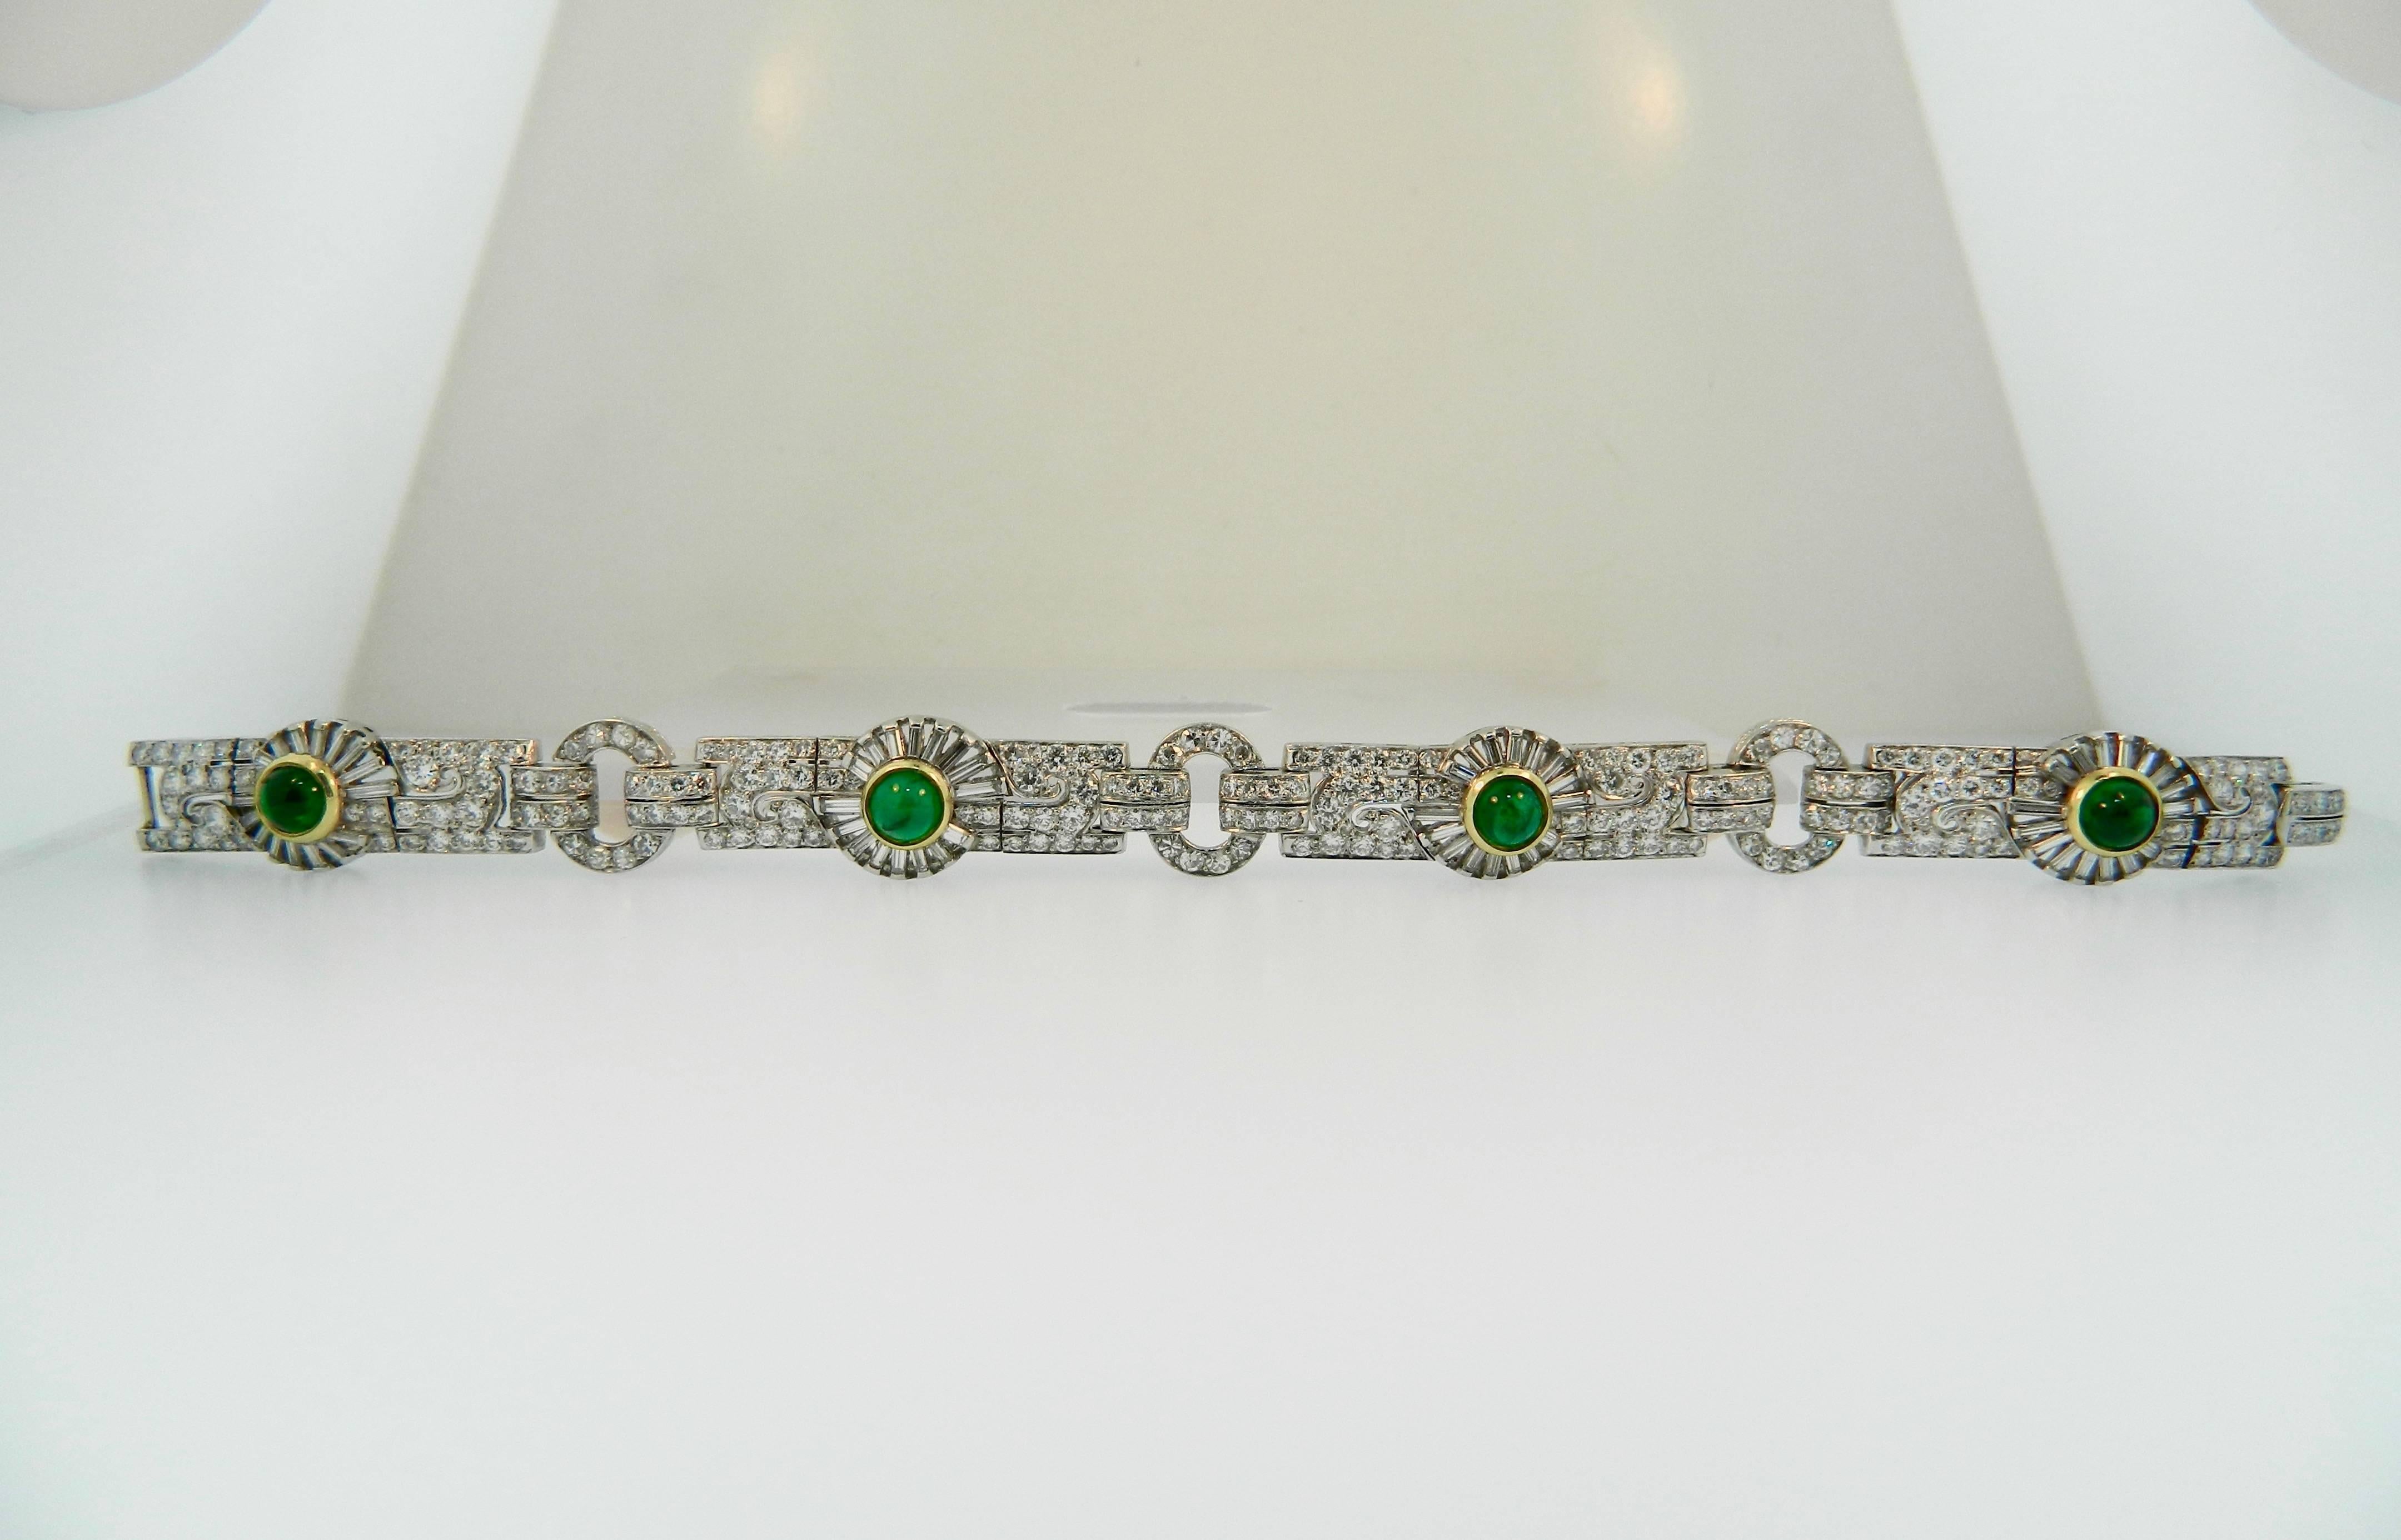 A gorgeous late 1920s/early 1930s Art Deco Platinum, Diamond and Emerald Bracelet.